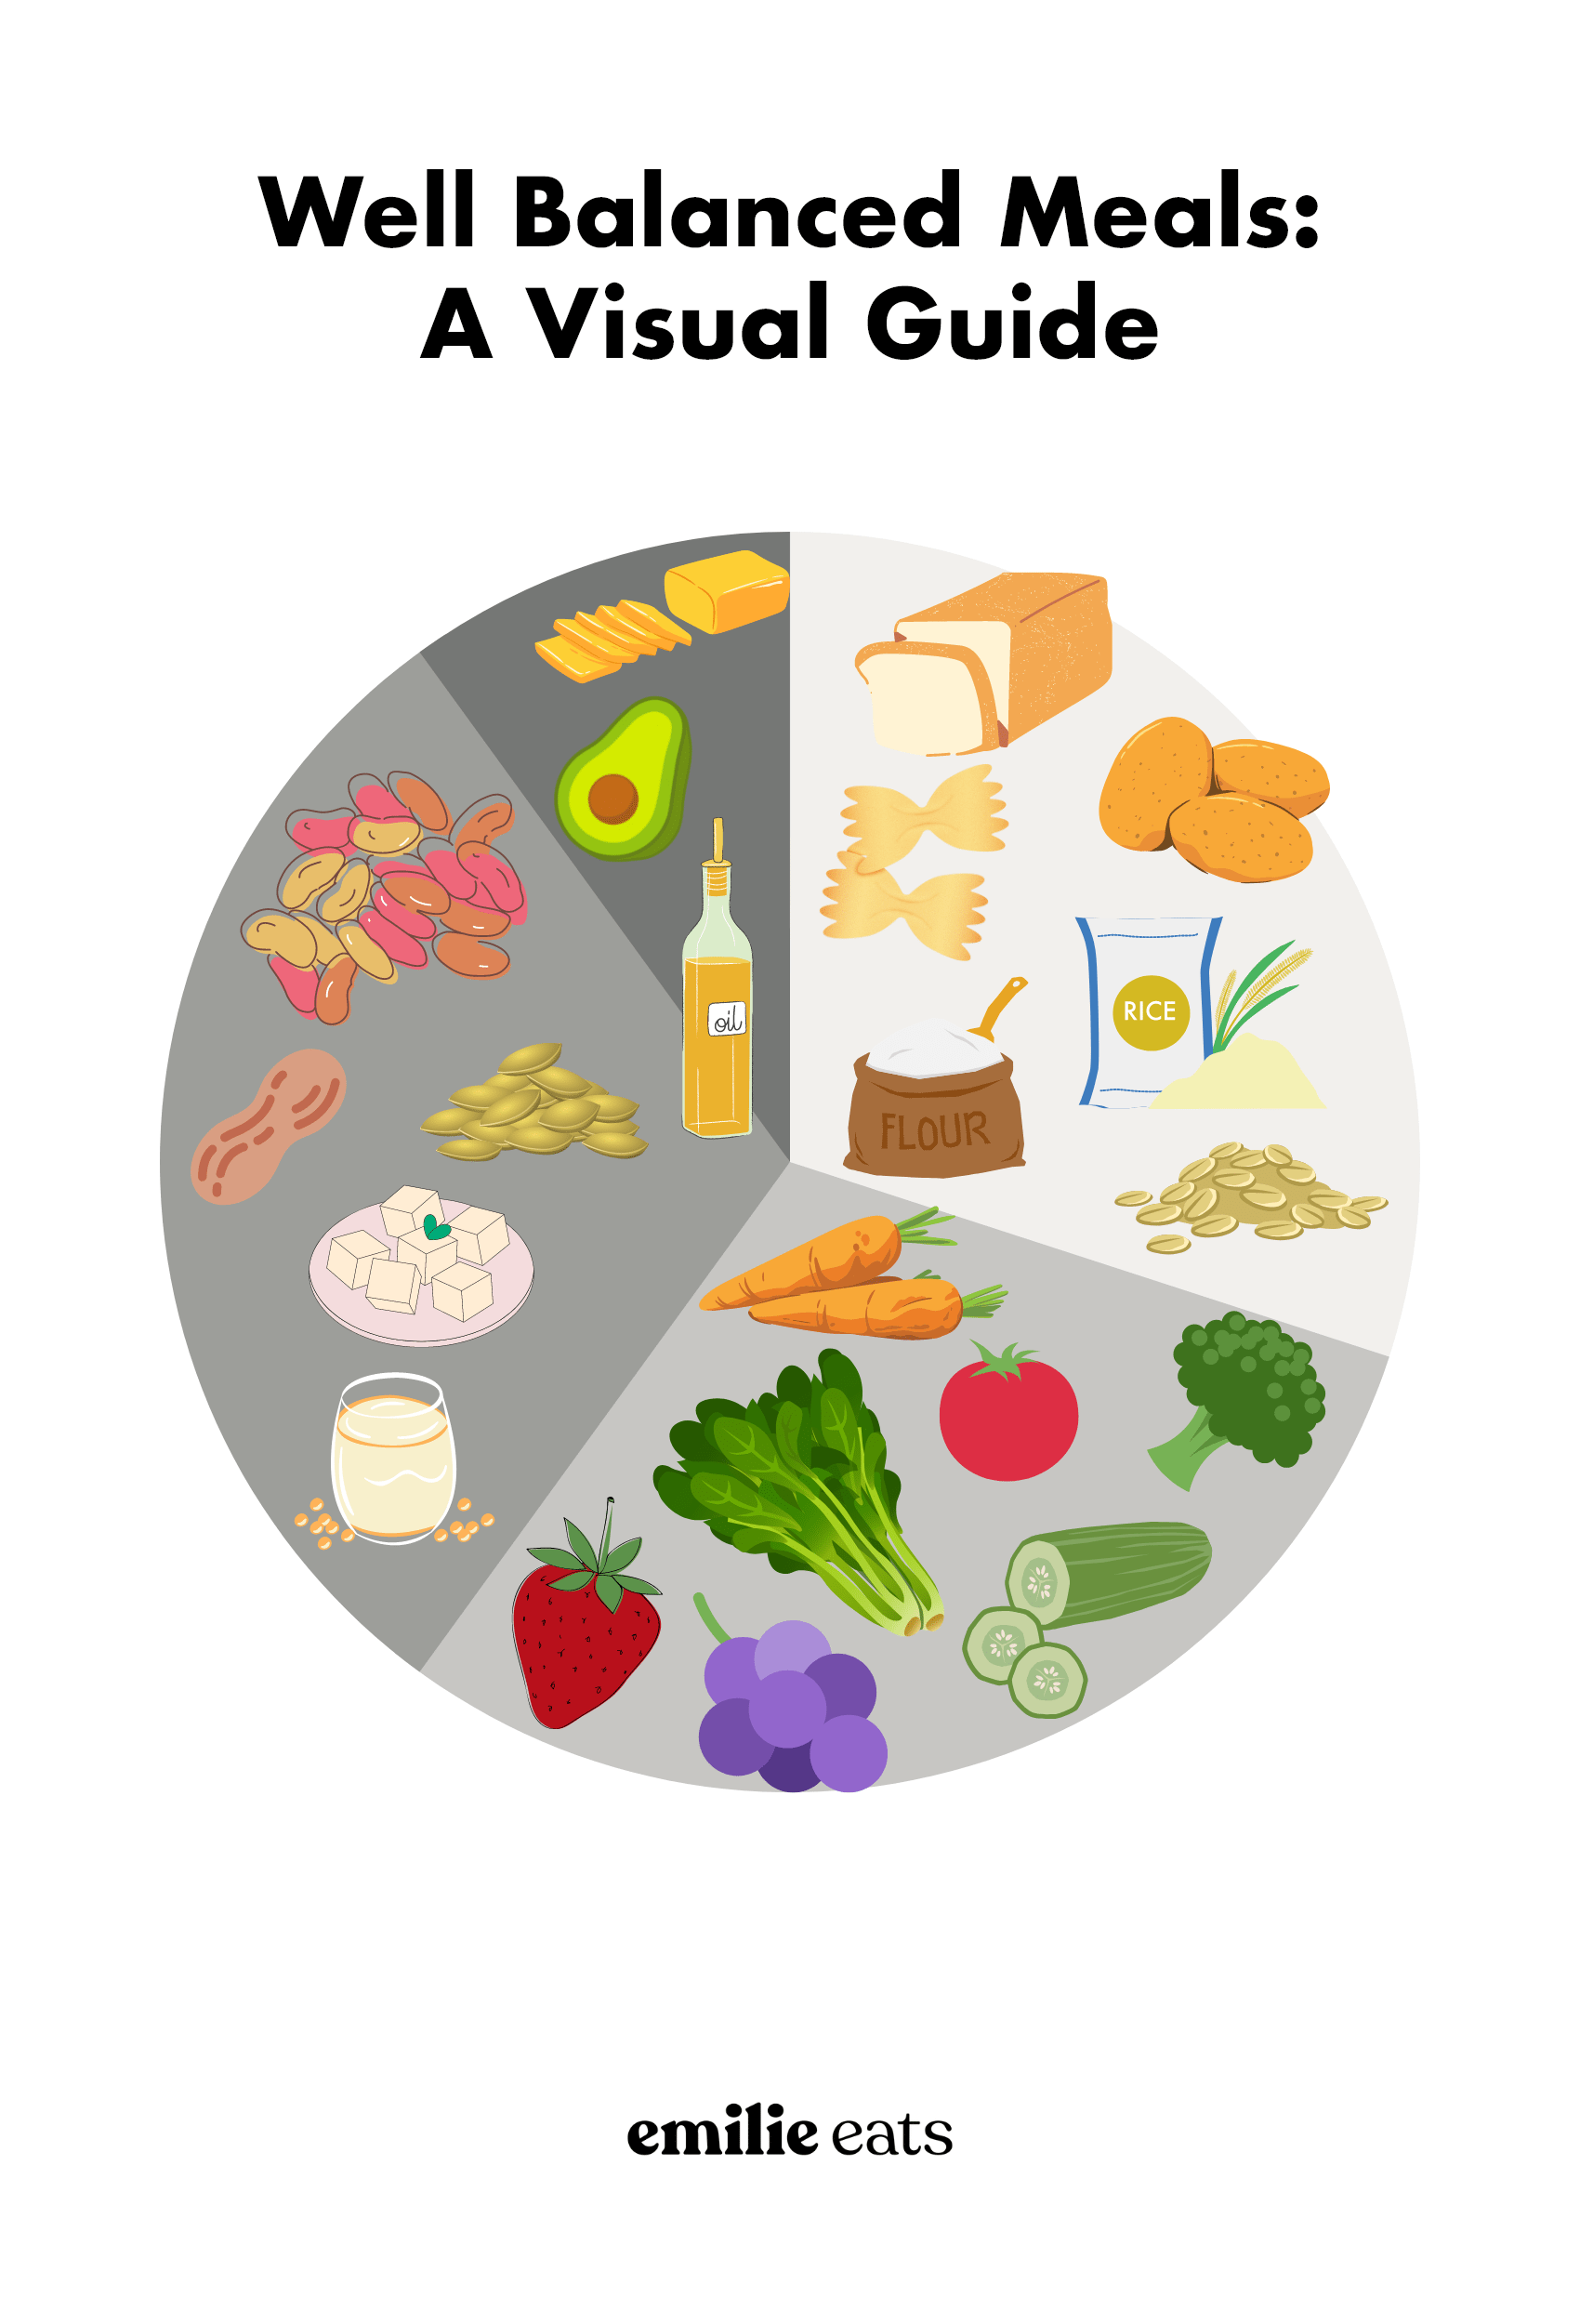 pie chart with a third filled with pictures of carbohydrate foods, a third filled with pictures with fruits and vegetables, a third filled with pictures of protein foods, and a sliver filled with pictures of fat foods